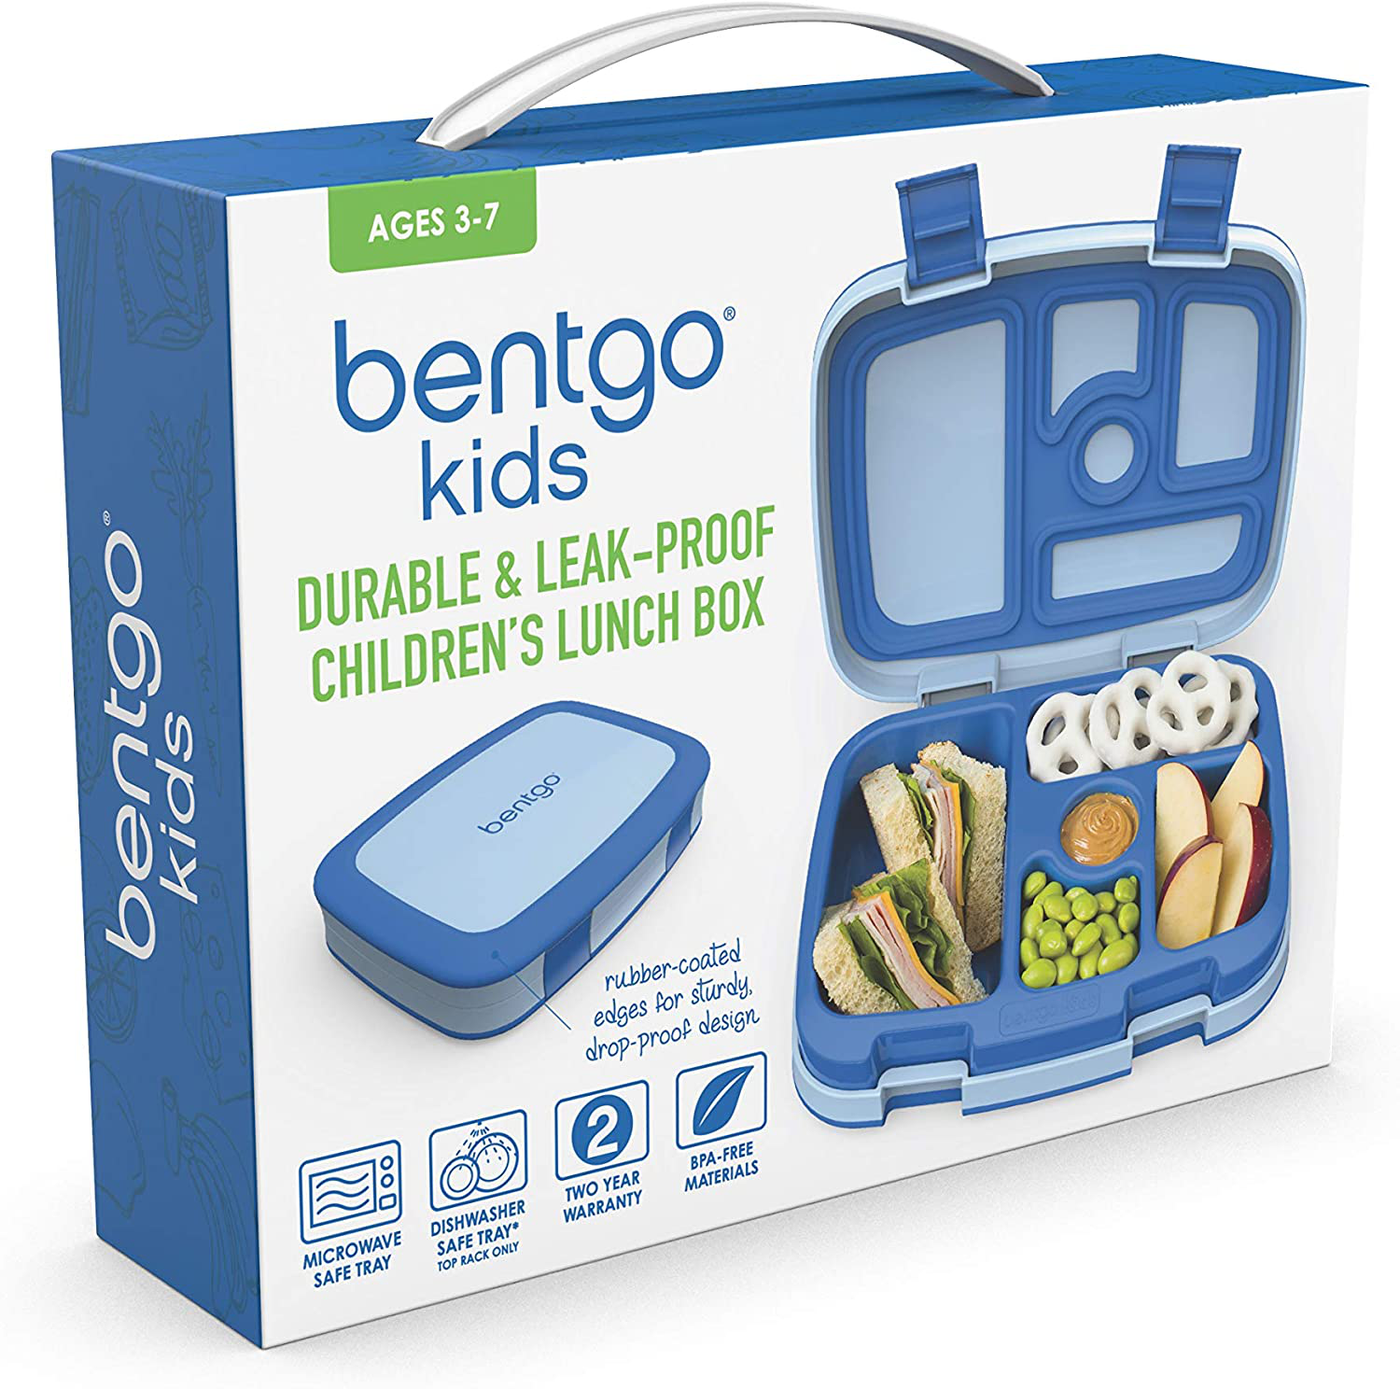 Bentgo Kids Children’s Lunch Box - Leak-Proof, 5-Compartment Bento-Style Kids Lunch Box - Ideal Portion Sizes for Ages 3 to 7 - BPA-Free, Dishwasher Safe, Food-Safe Materials (Purple)